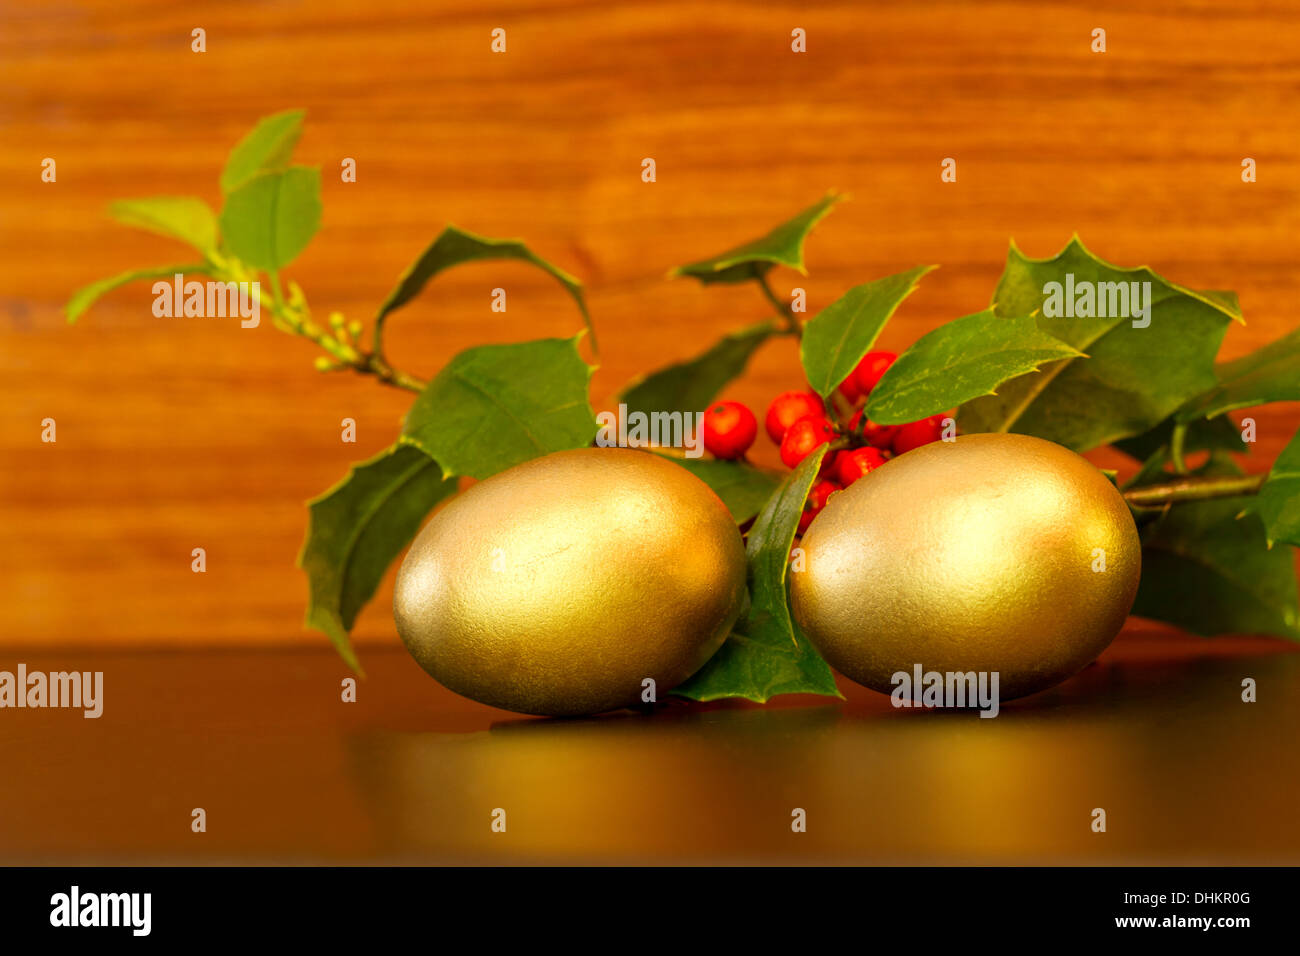 Two gold nest eggs with festive green holly sprigs and red berries placed on wood grain background. Stock Photo